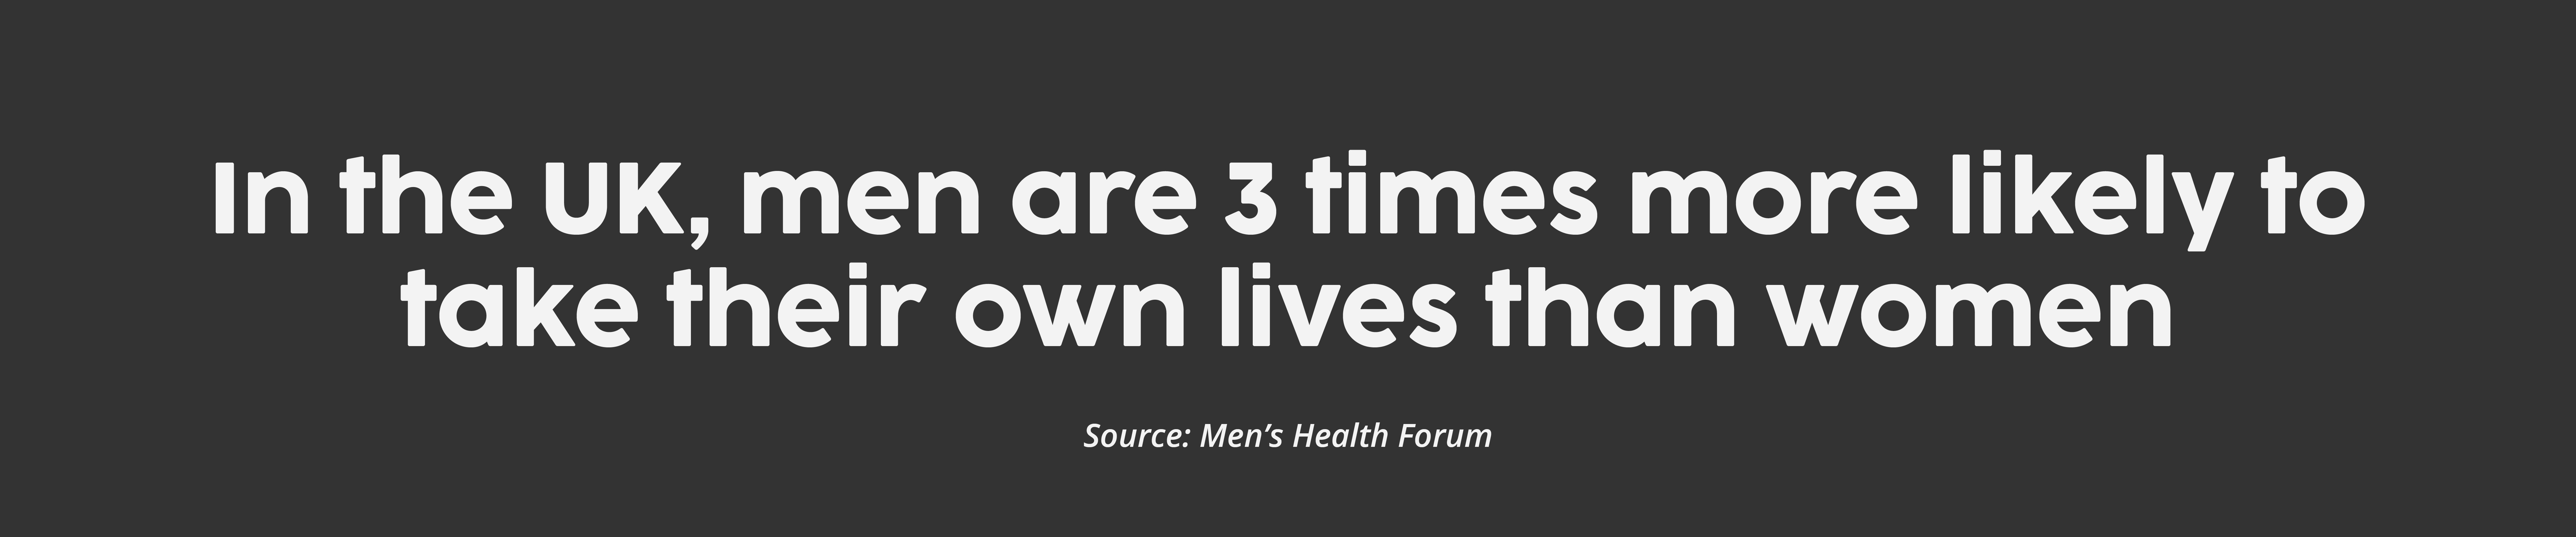 in the UK men are 3 times more likely to take their own lives than women